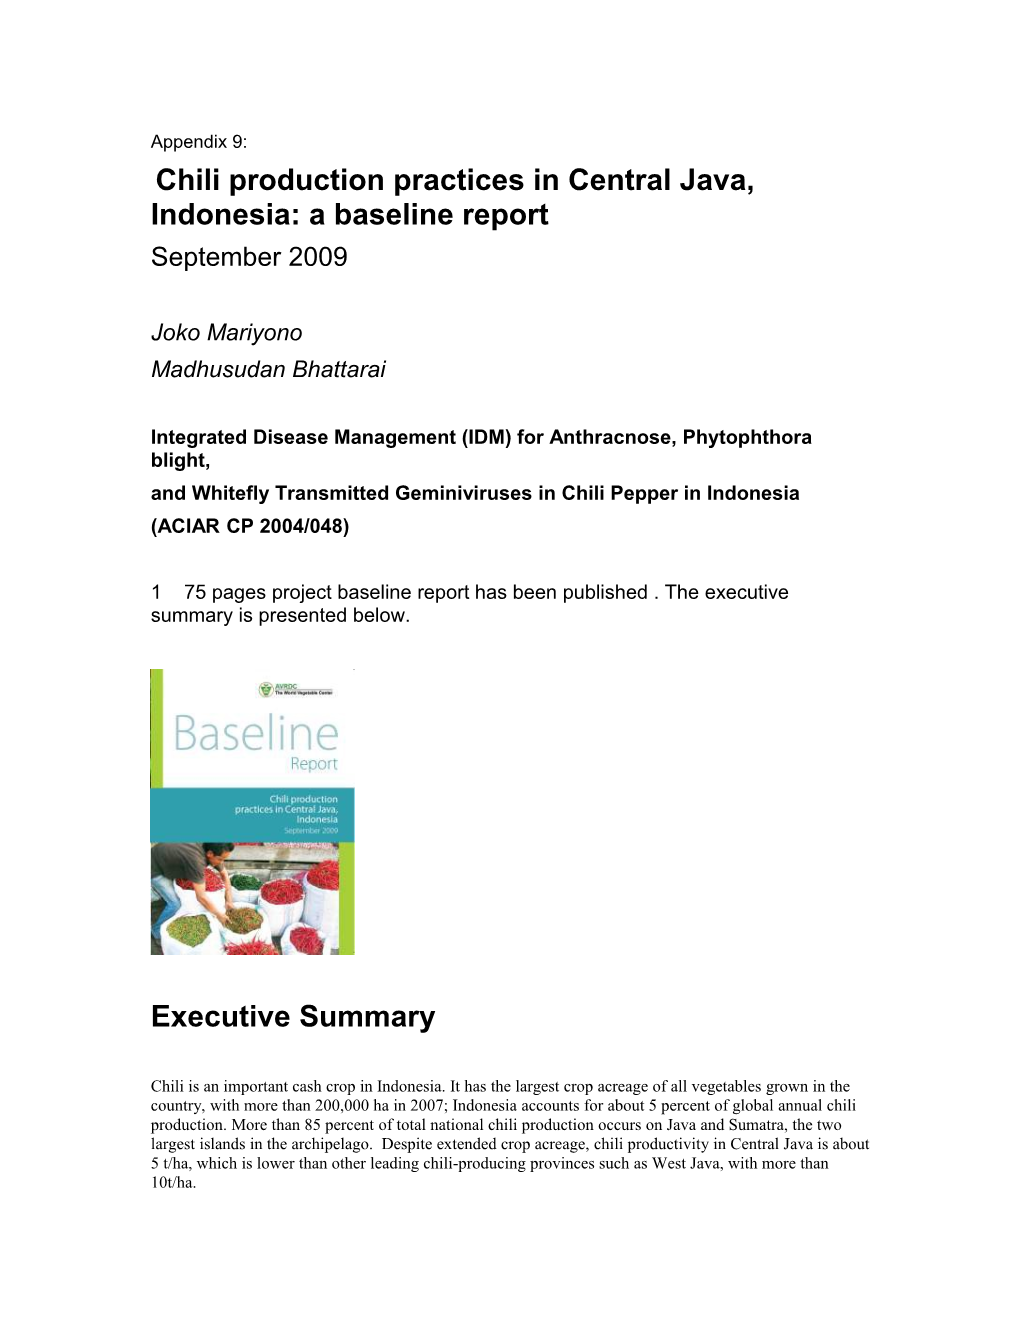 Chili Production Practices in Central Java, Indonesia: a Baseline Report